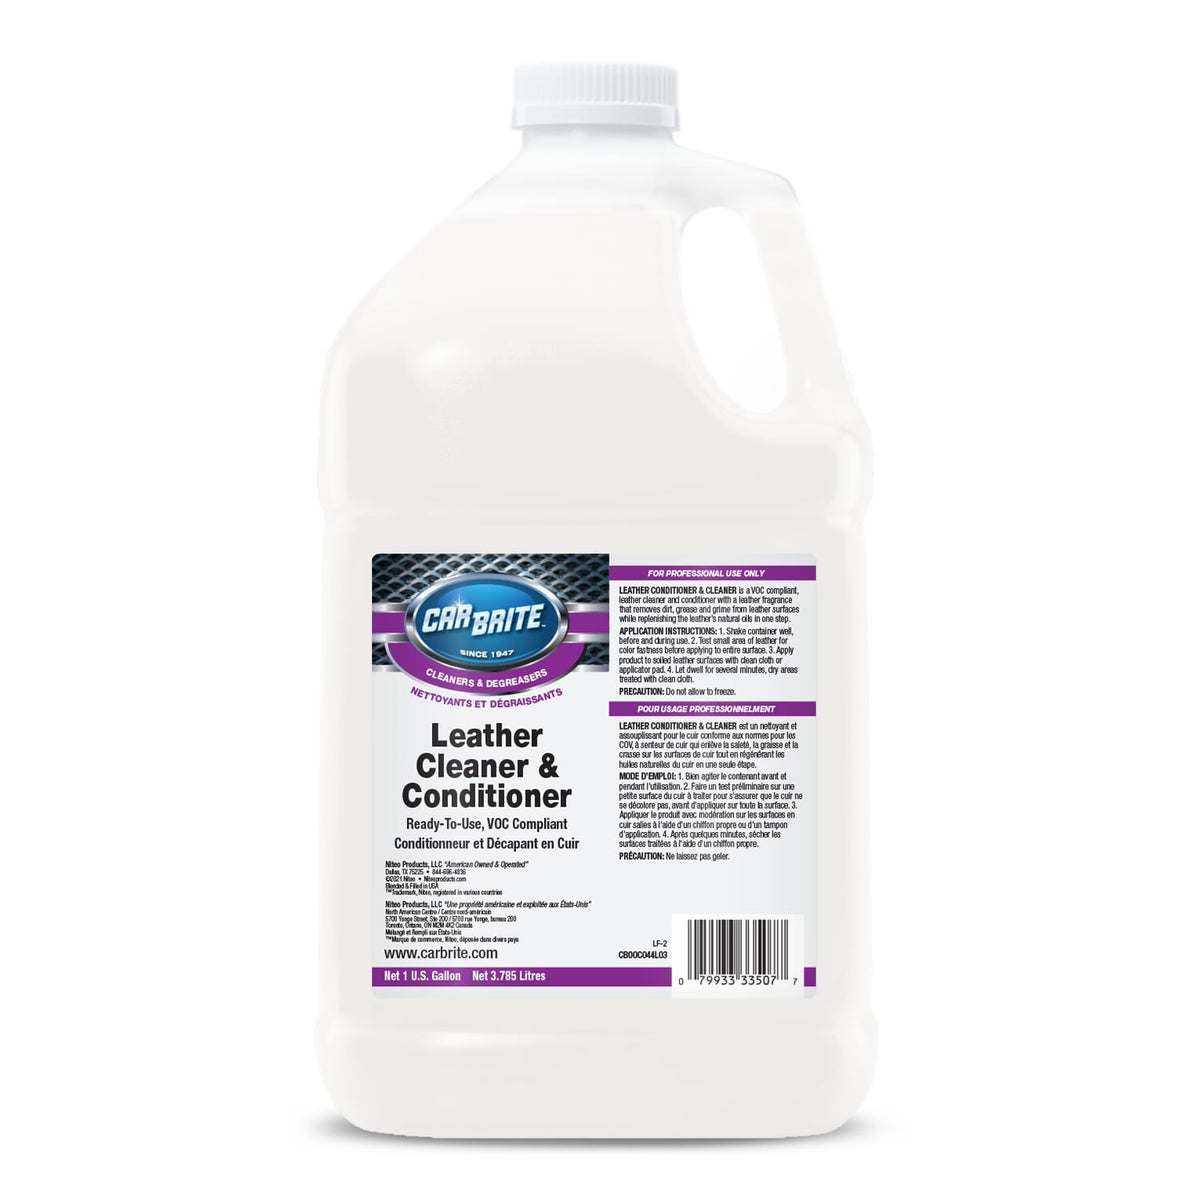 Leather Revive Leather Cleaner for Car Interior | Leather Conditioner | Leather Seat Cleaner and Conditioner (1 Gallon)